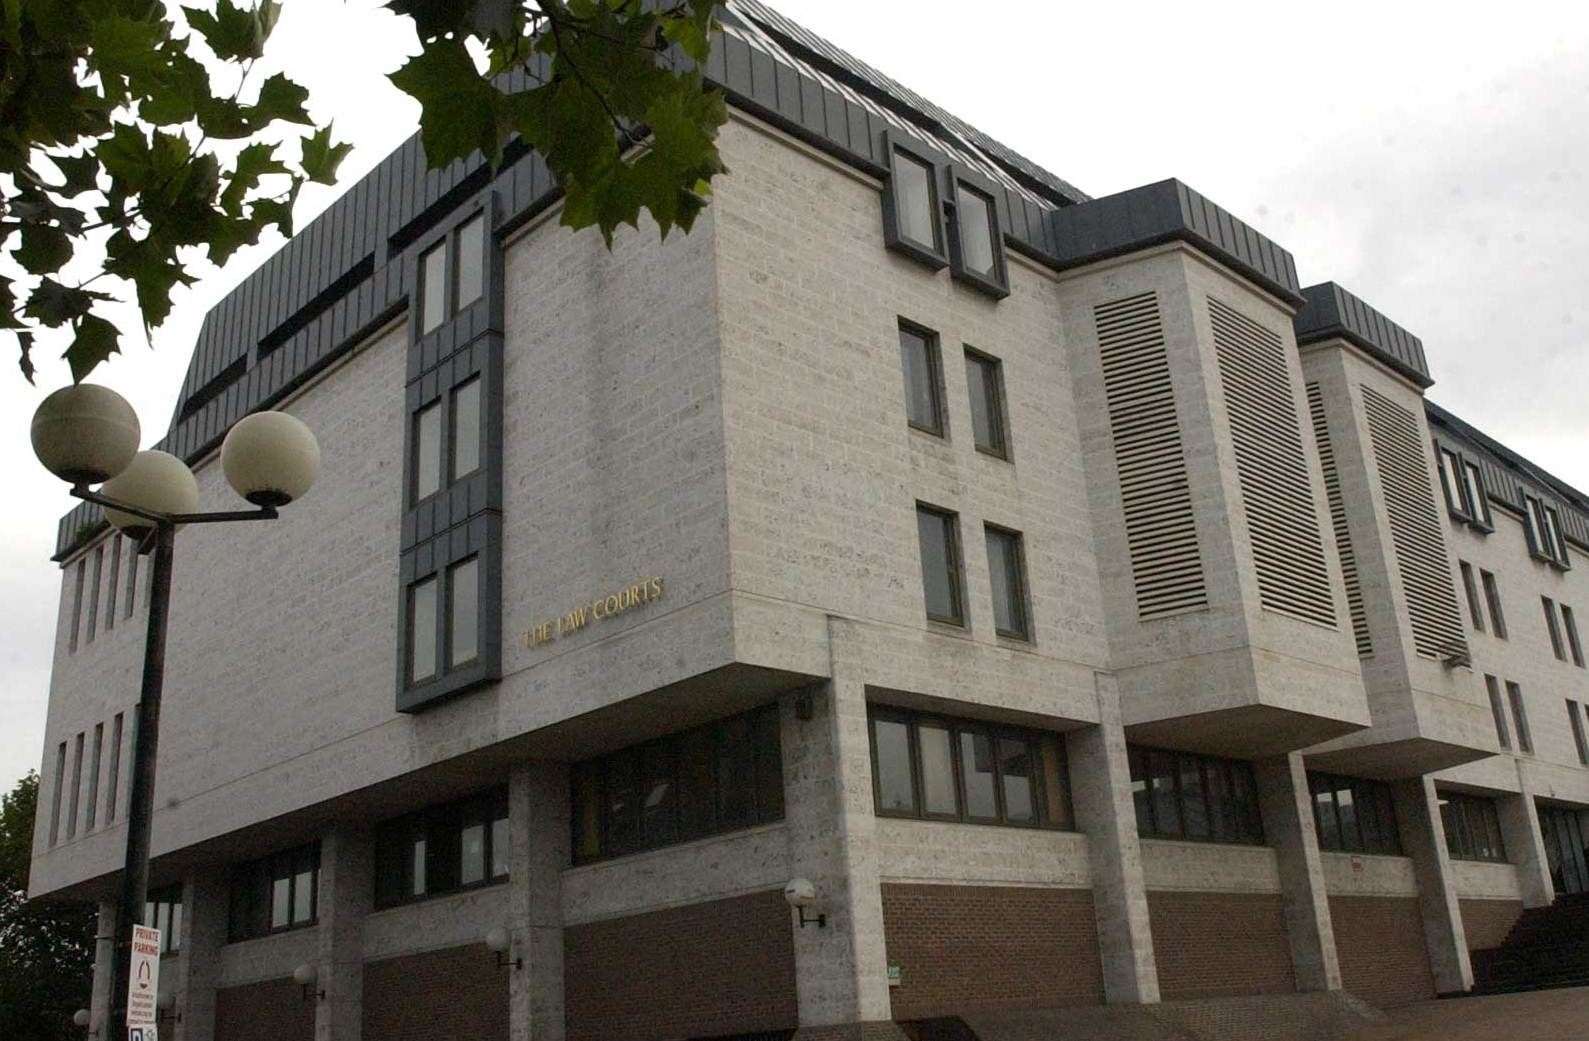 Carvill was sentenced at Maidstone Crown Court today